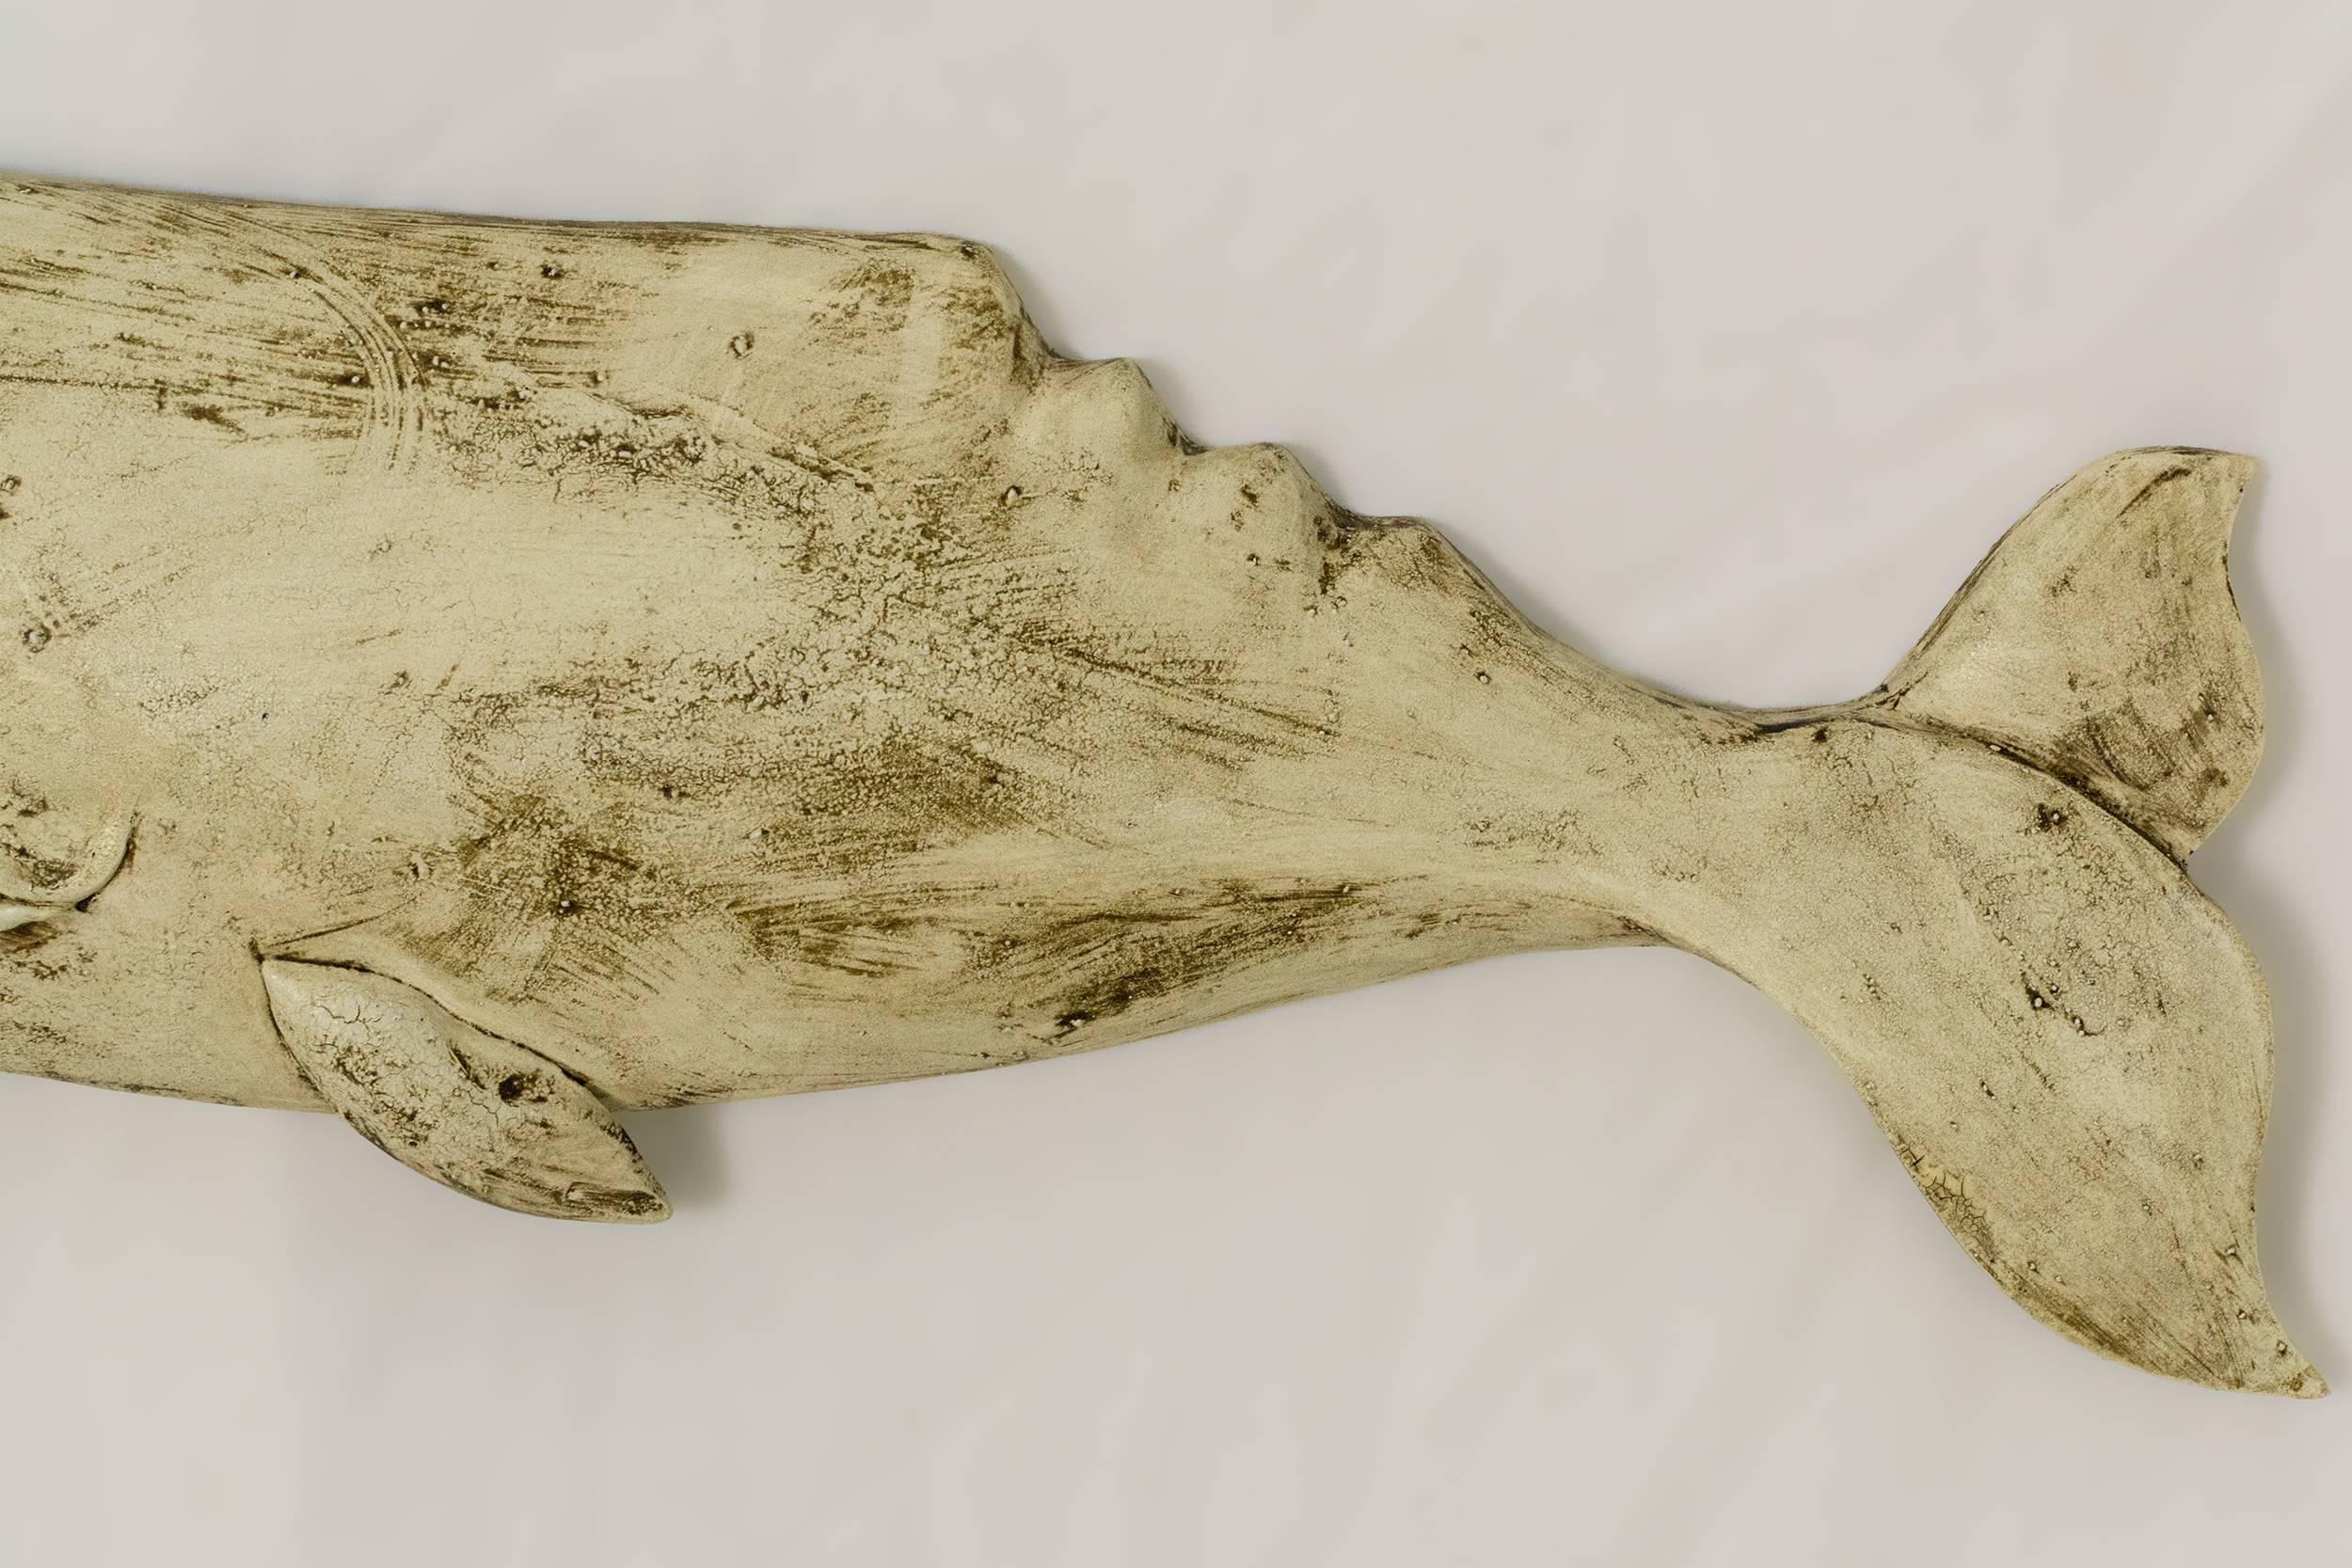 The whale plaque is beautifully carved from basswood and given multiple layers of milk paint to give the finished product a wonderful surface and personality.